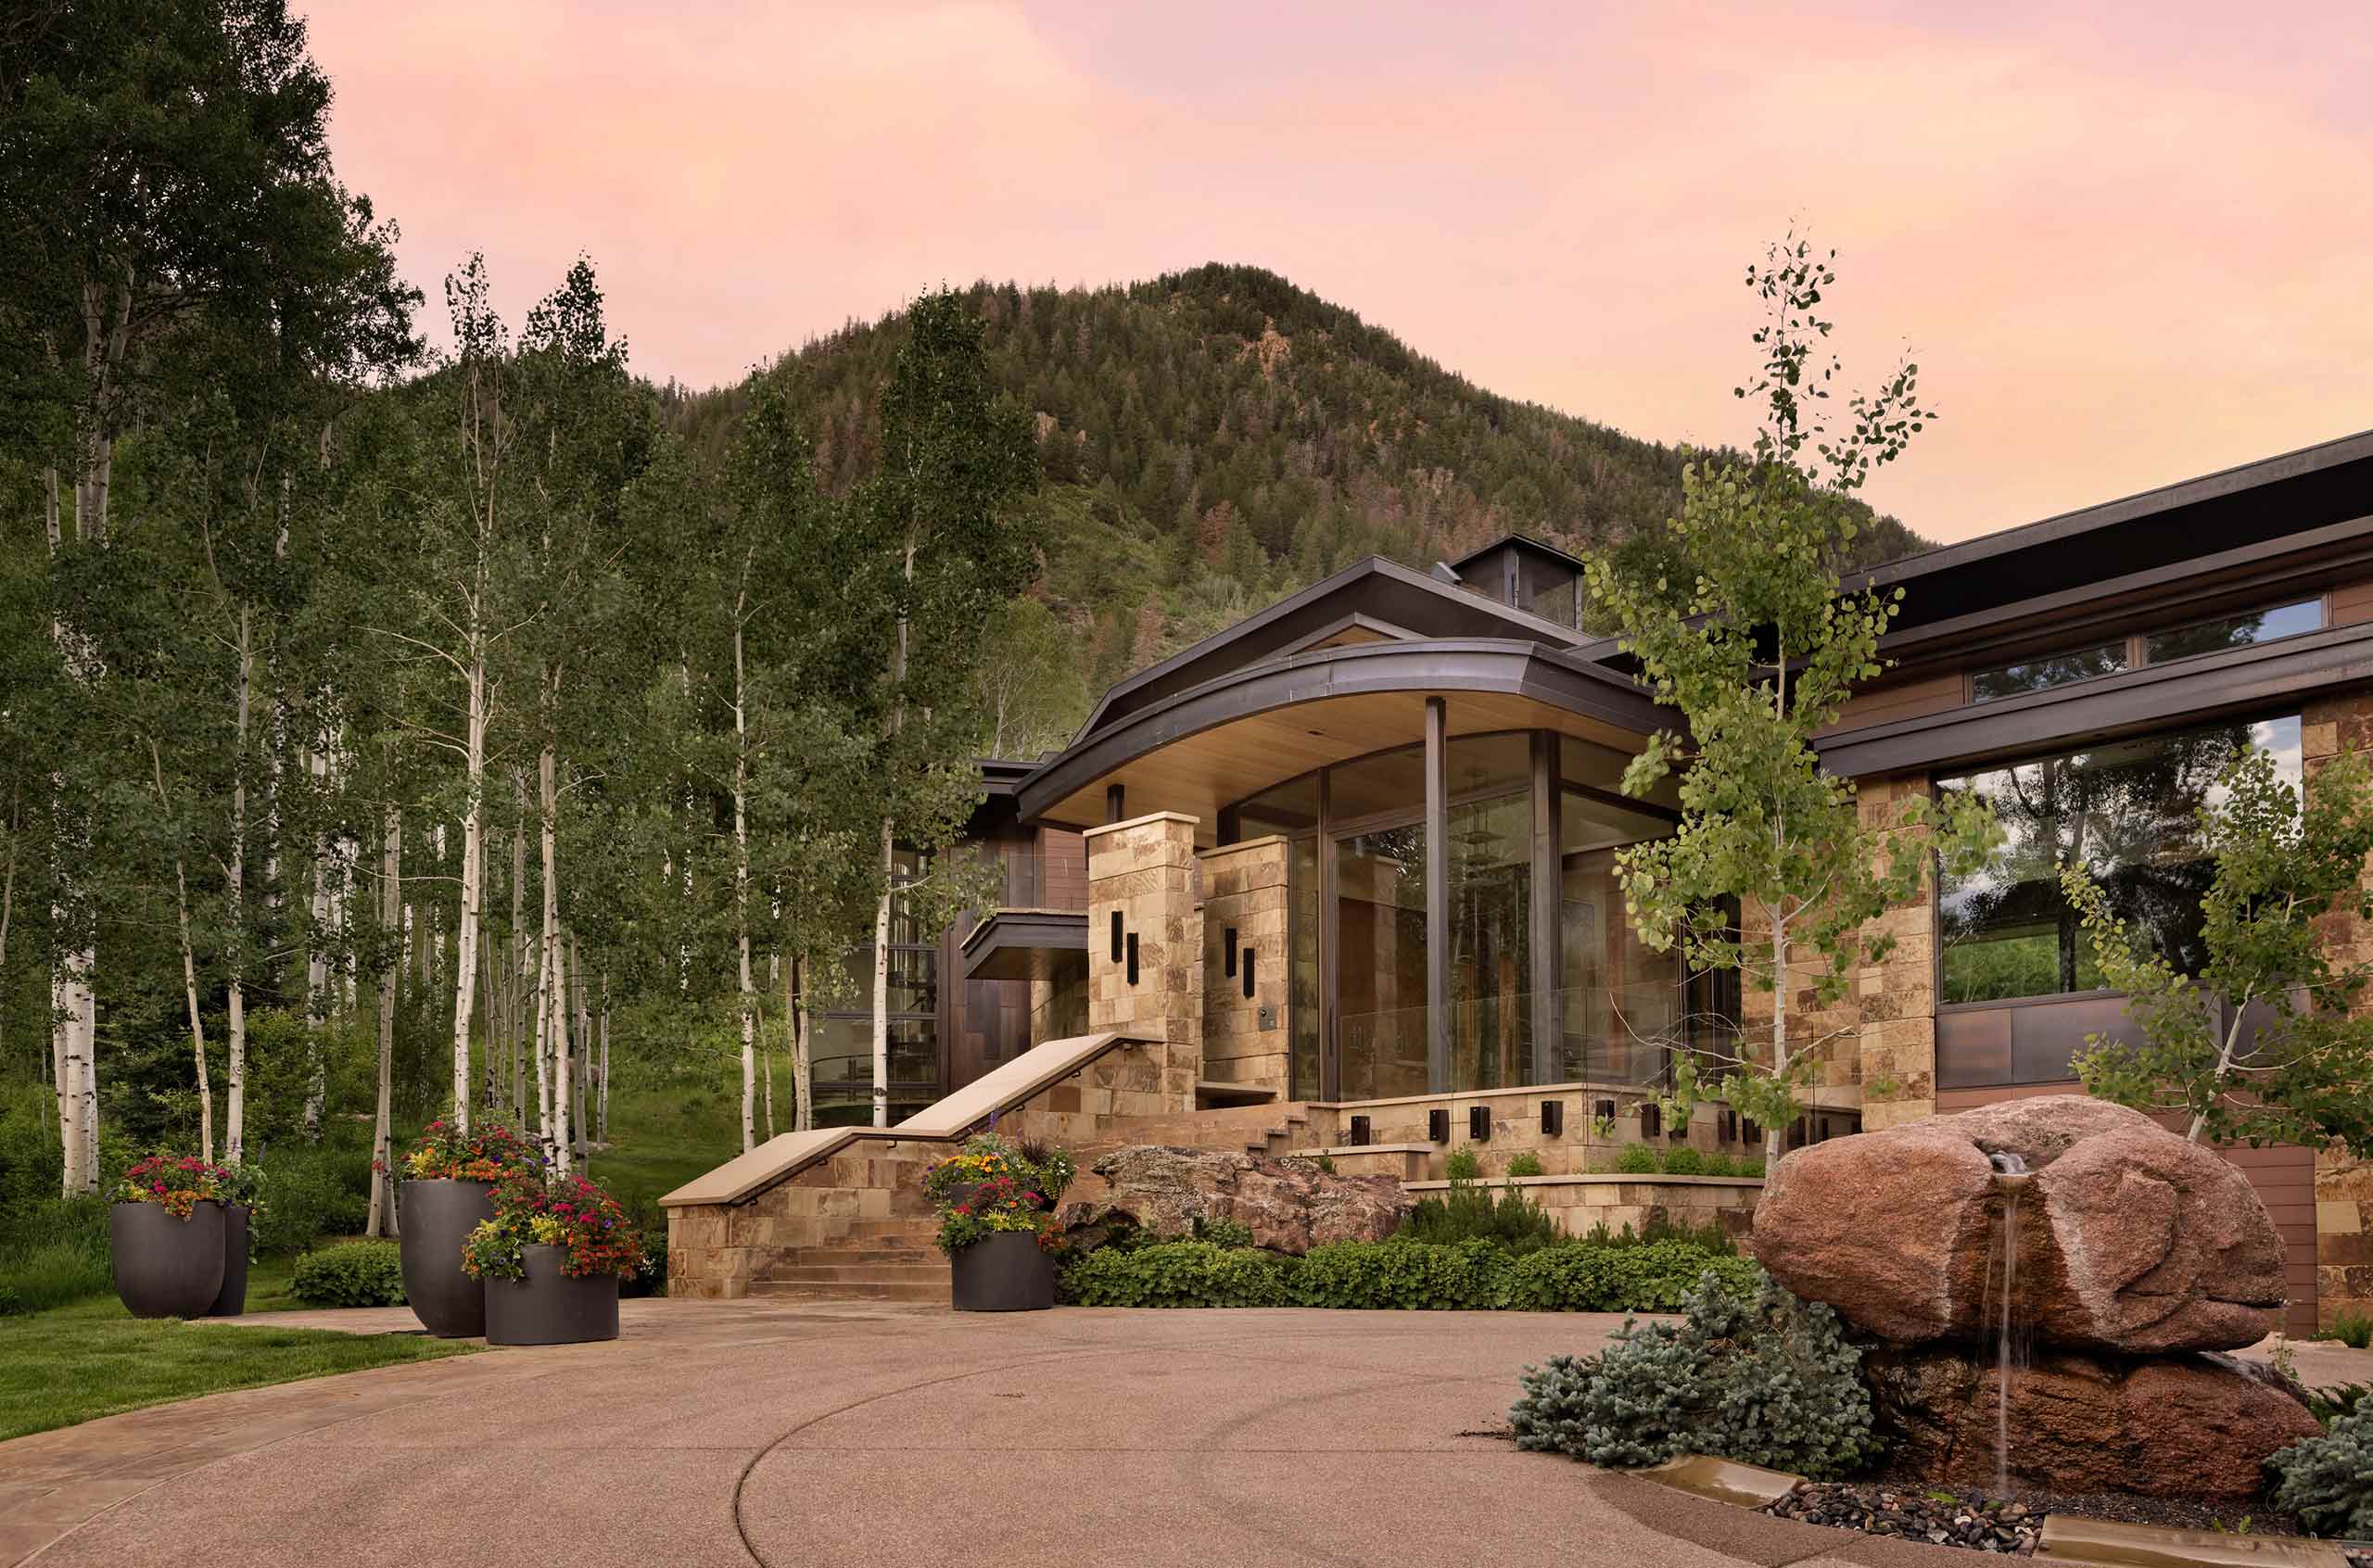 Driveway of an Aspen Cuvée luxury villa with sweeping mountain views, oversized glass windows, and remote mountain location.